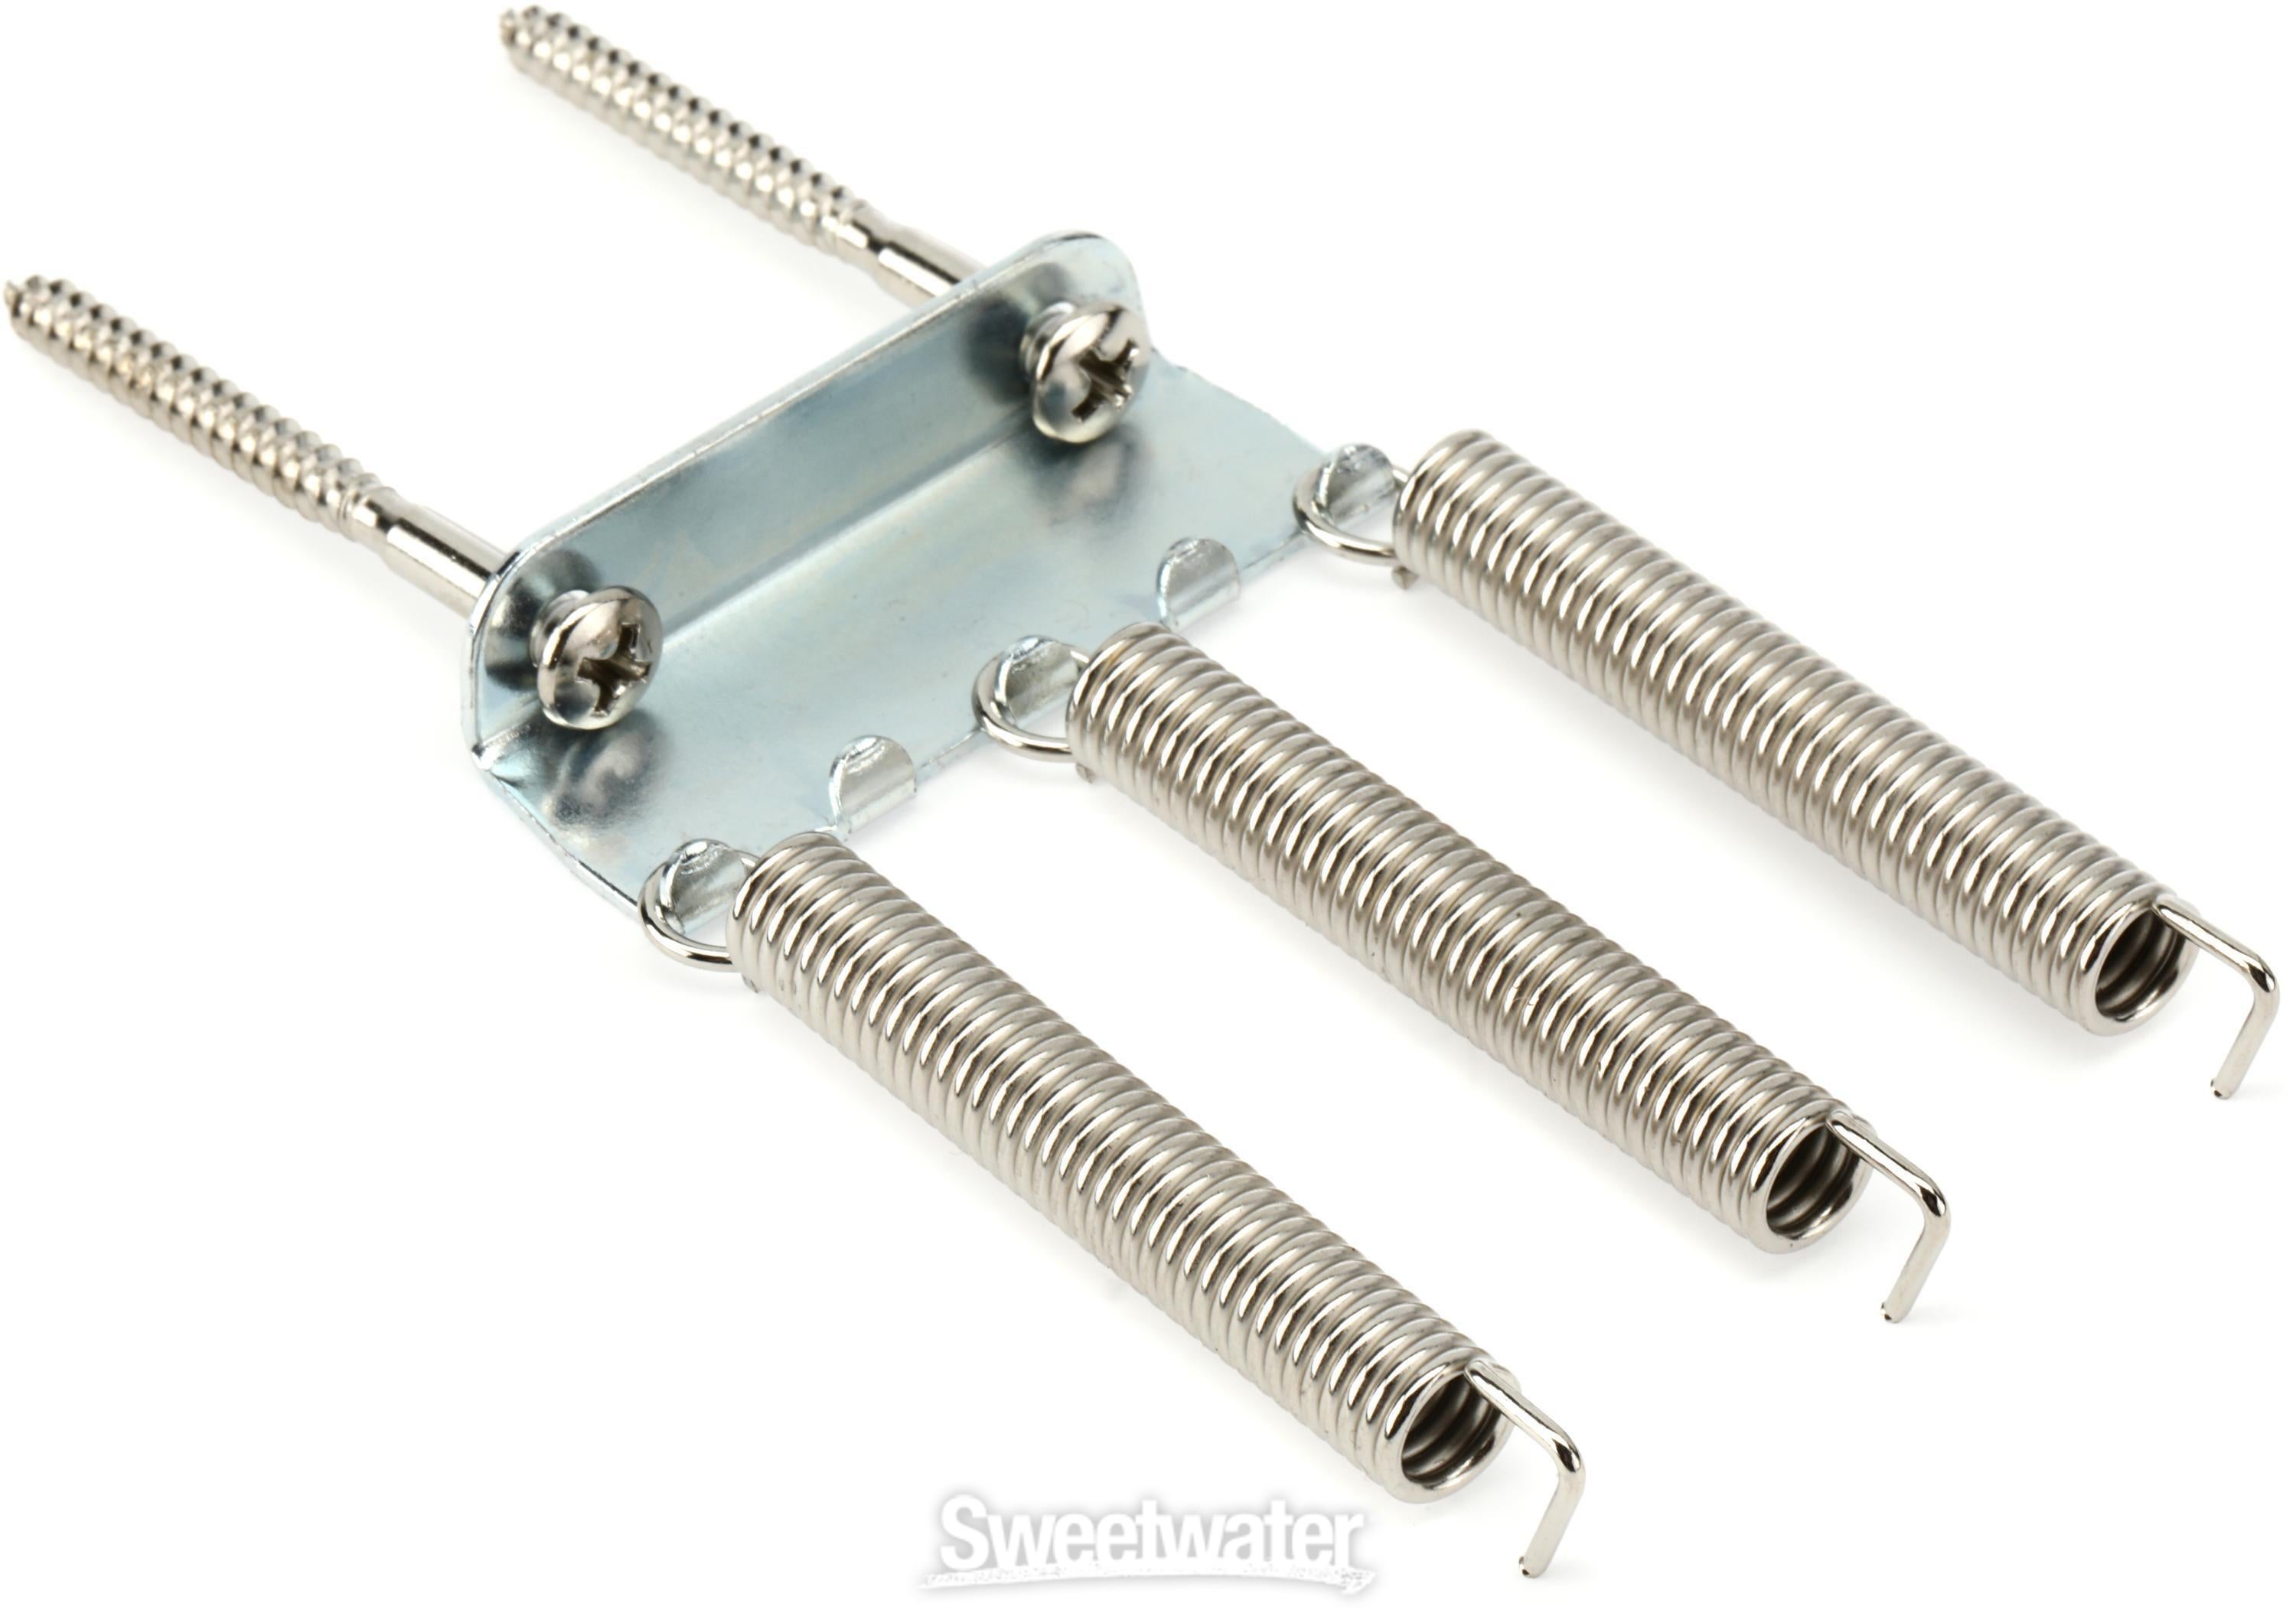 Fender Pure Vintage Statocaster Tremolo Spring/Claw Kit | Sweetwater